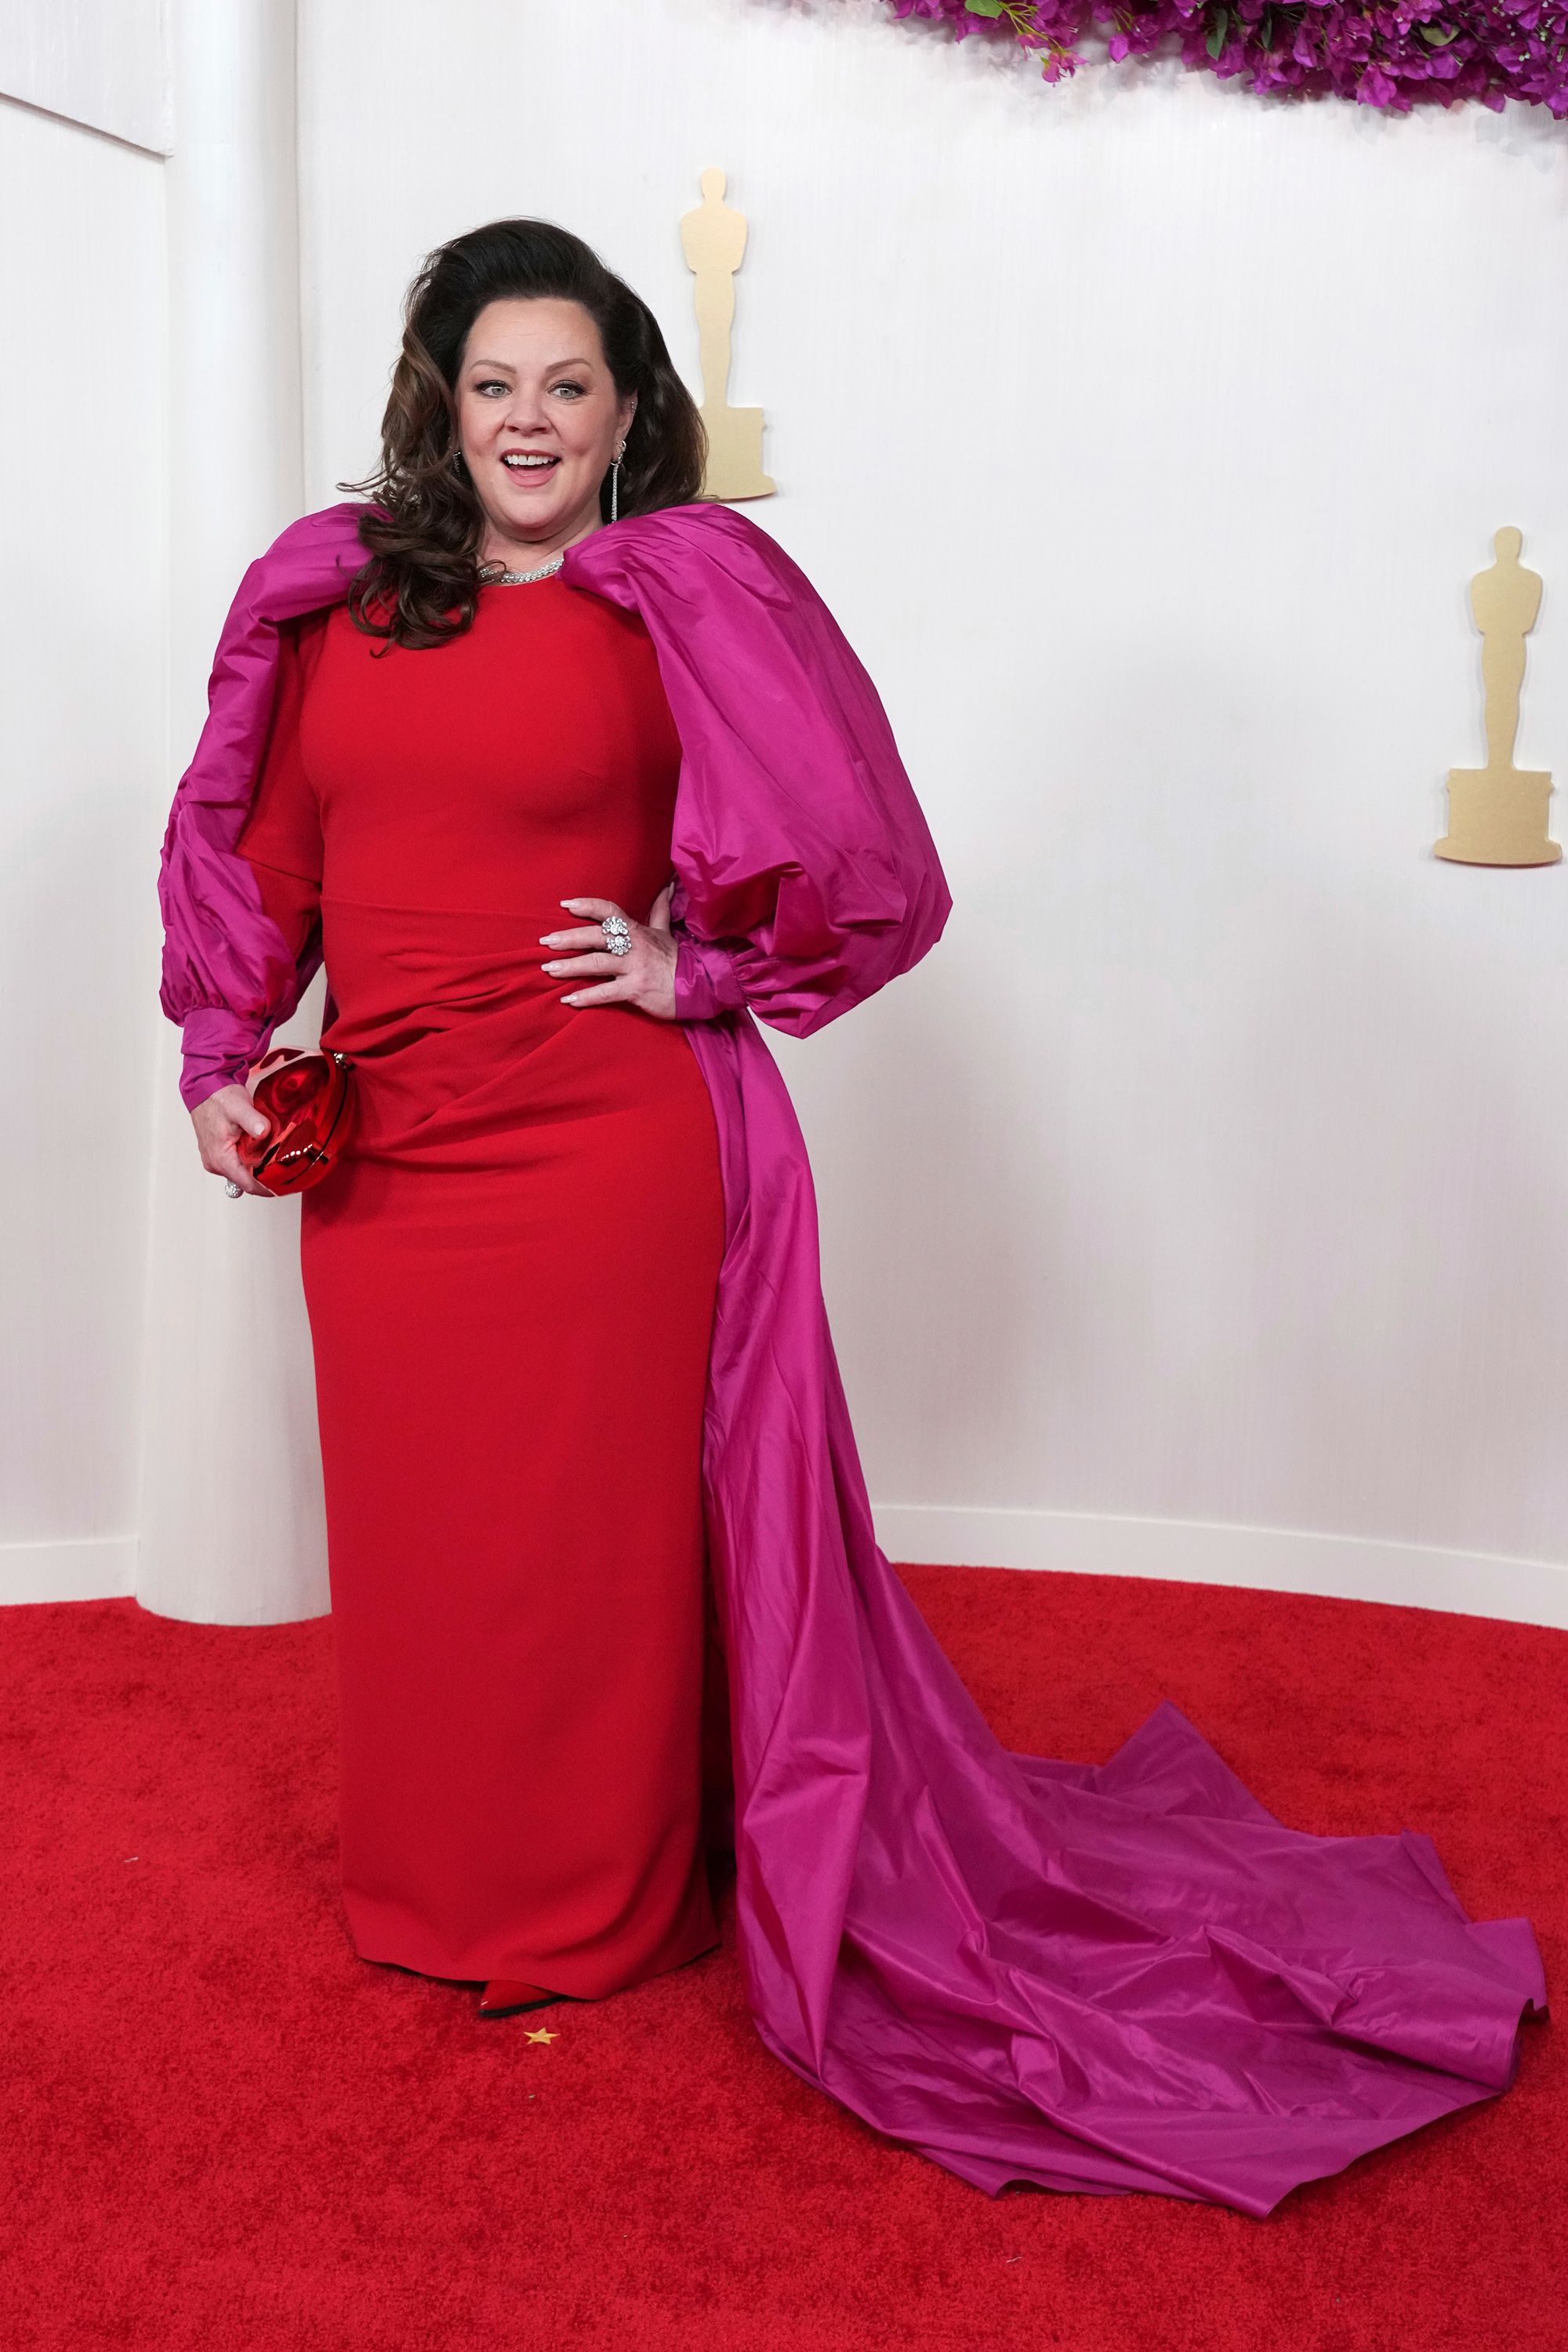 Melissa McCarthy exuded old Hollywood glamor in a red dress with purple sleeves.  The actor accessorized with Dena Kemp jewelry.